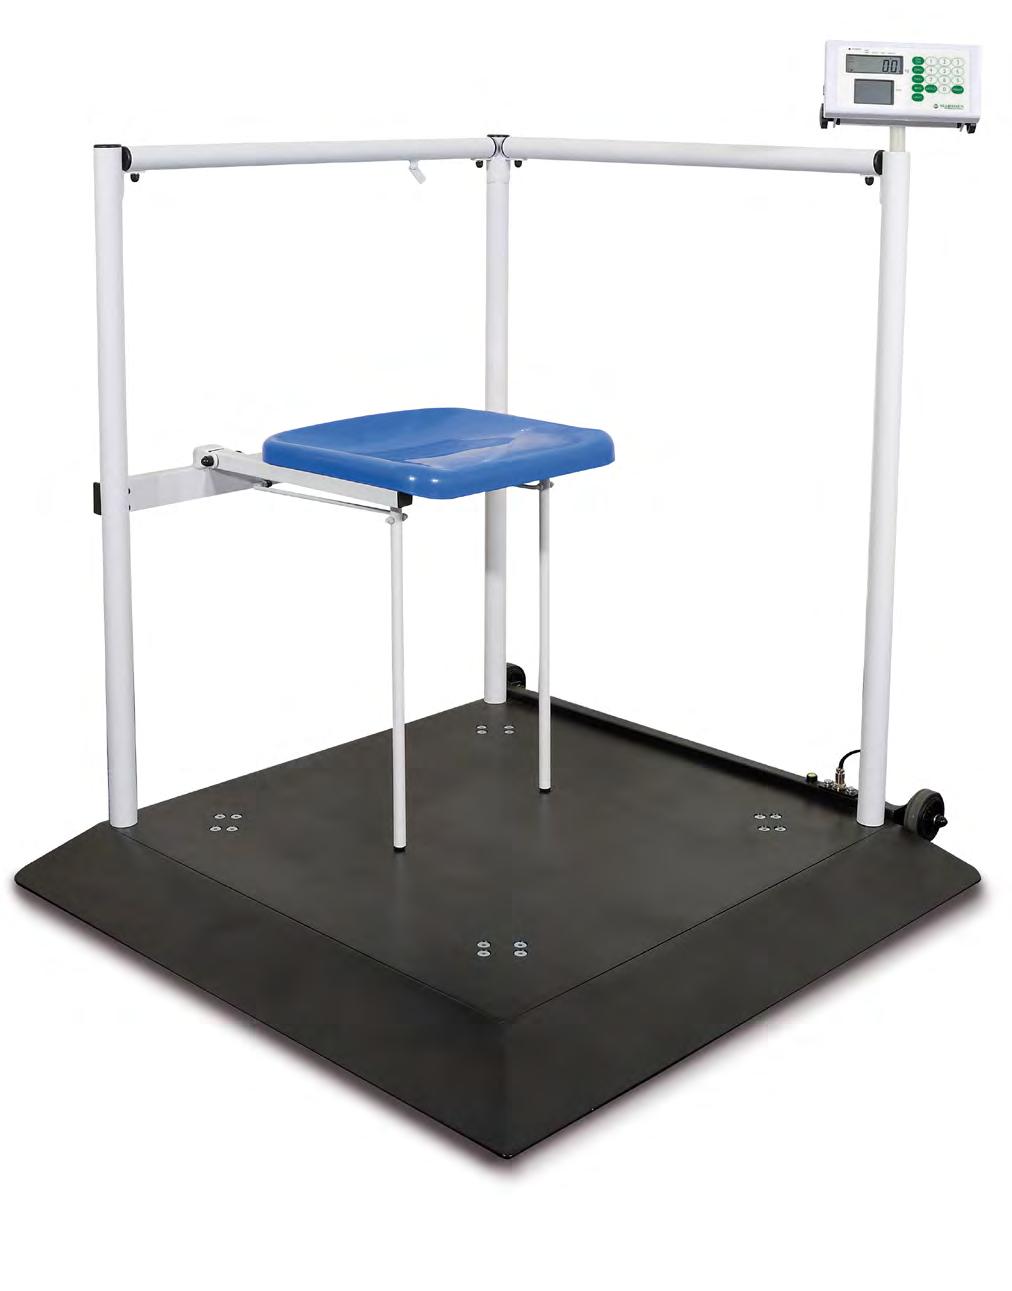 Marsden M-640 Marsden Professional Personal and Wheelchair Scale High capacity scale designed to weigh bariatric patients.